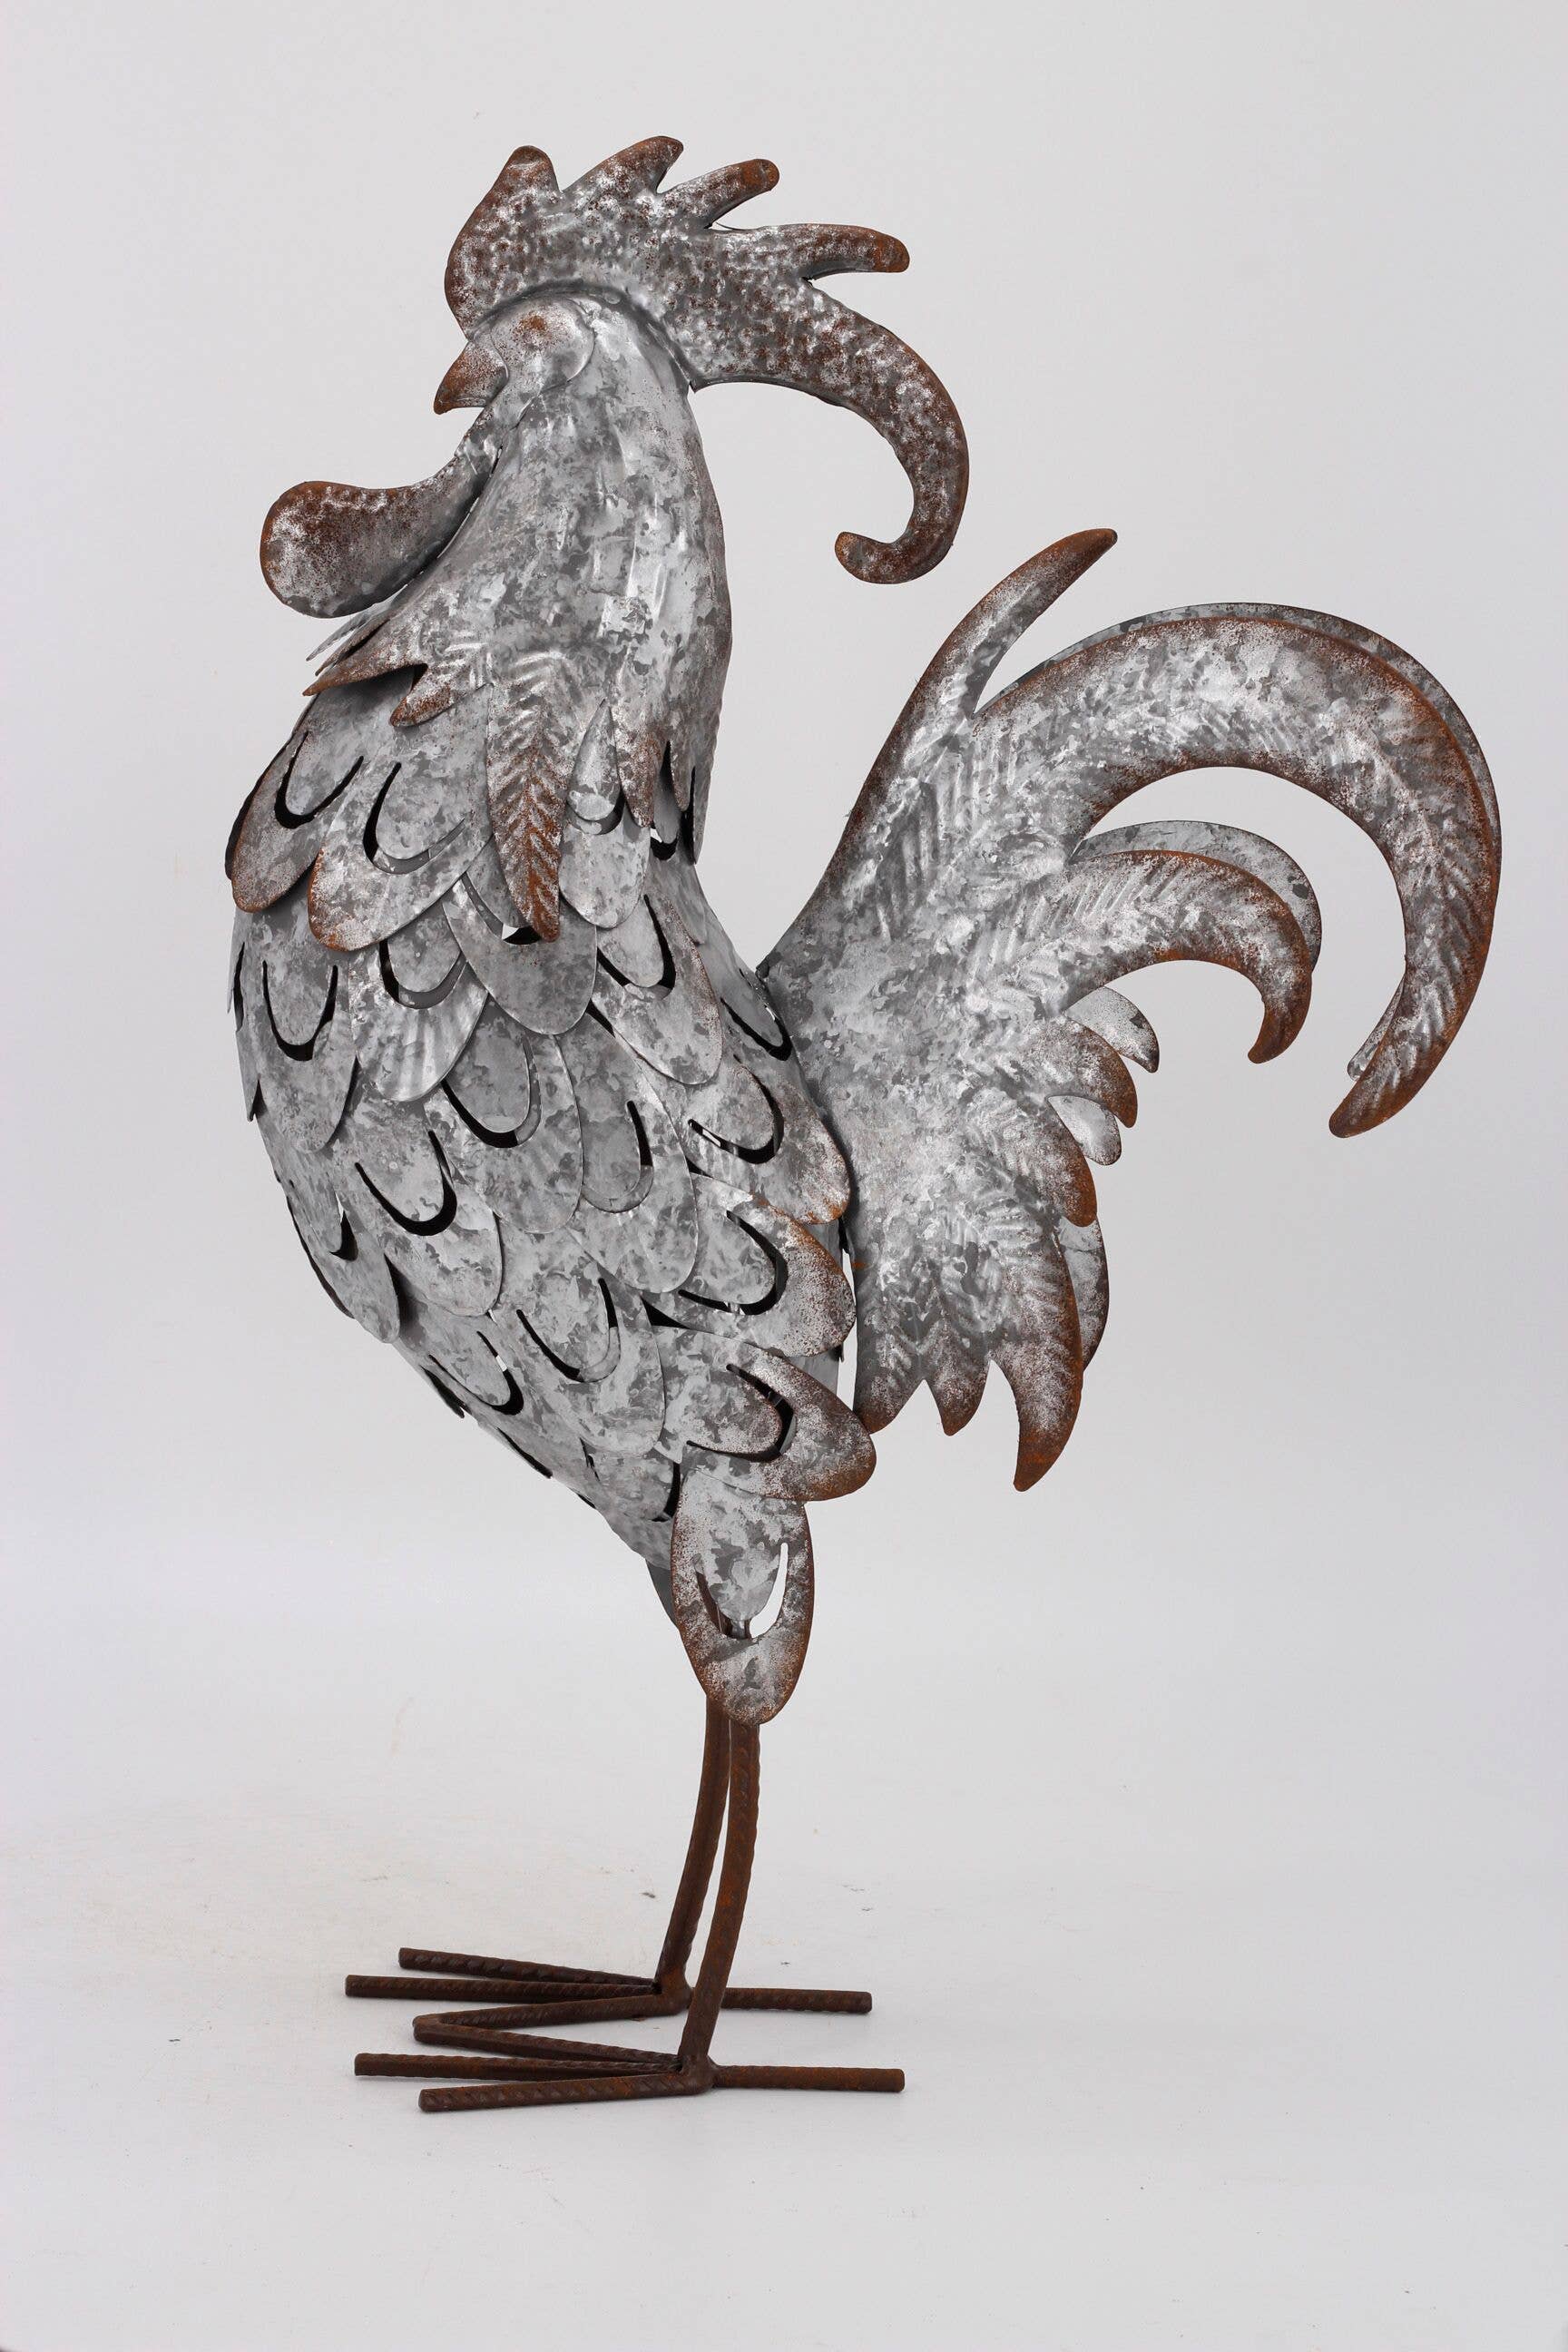 Galvanized Metal Rooster by Drew Derose - The Pink Pigs, A Compassionate Boutique